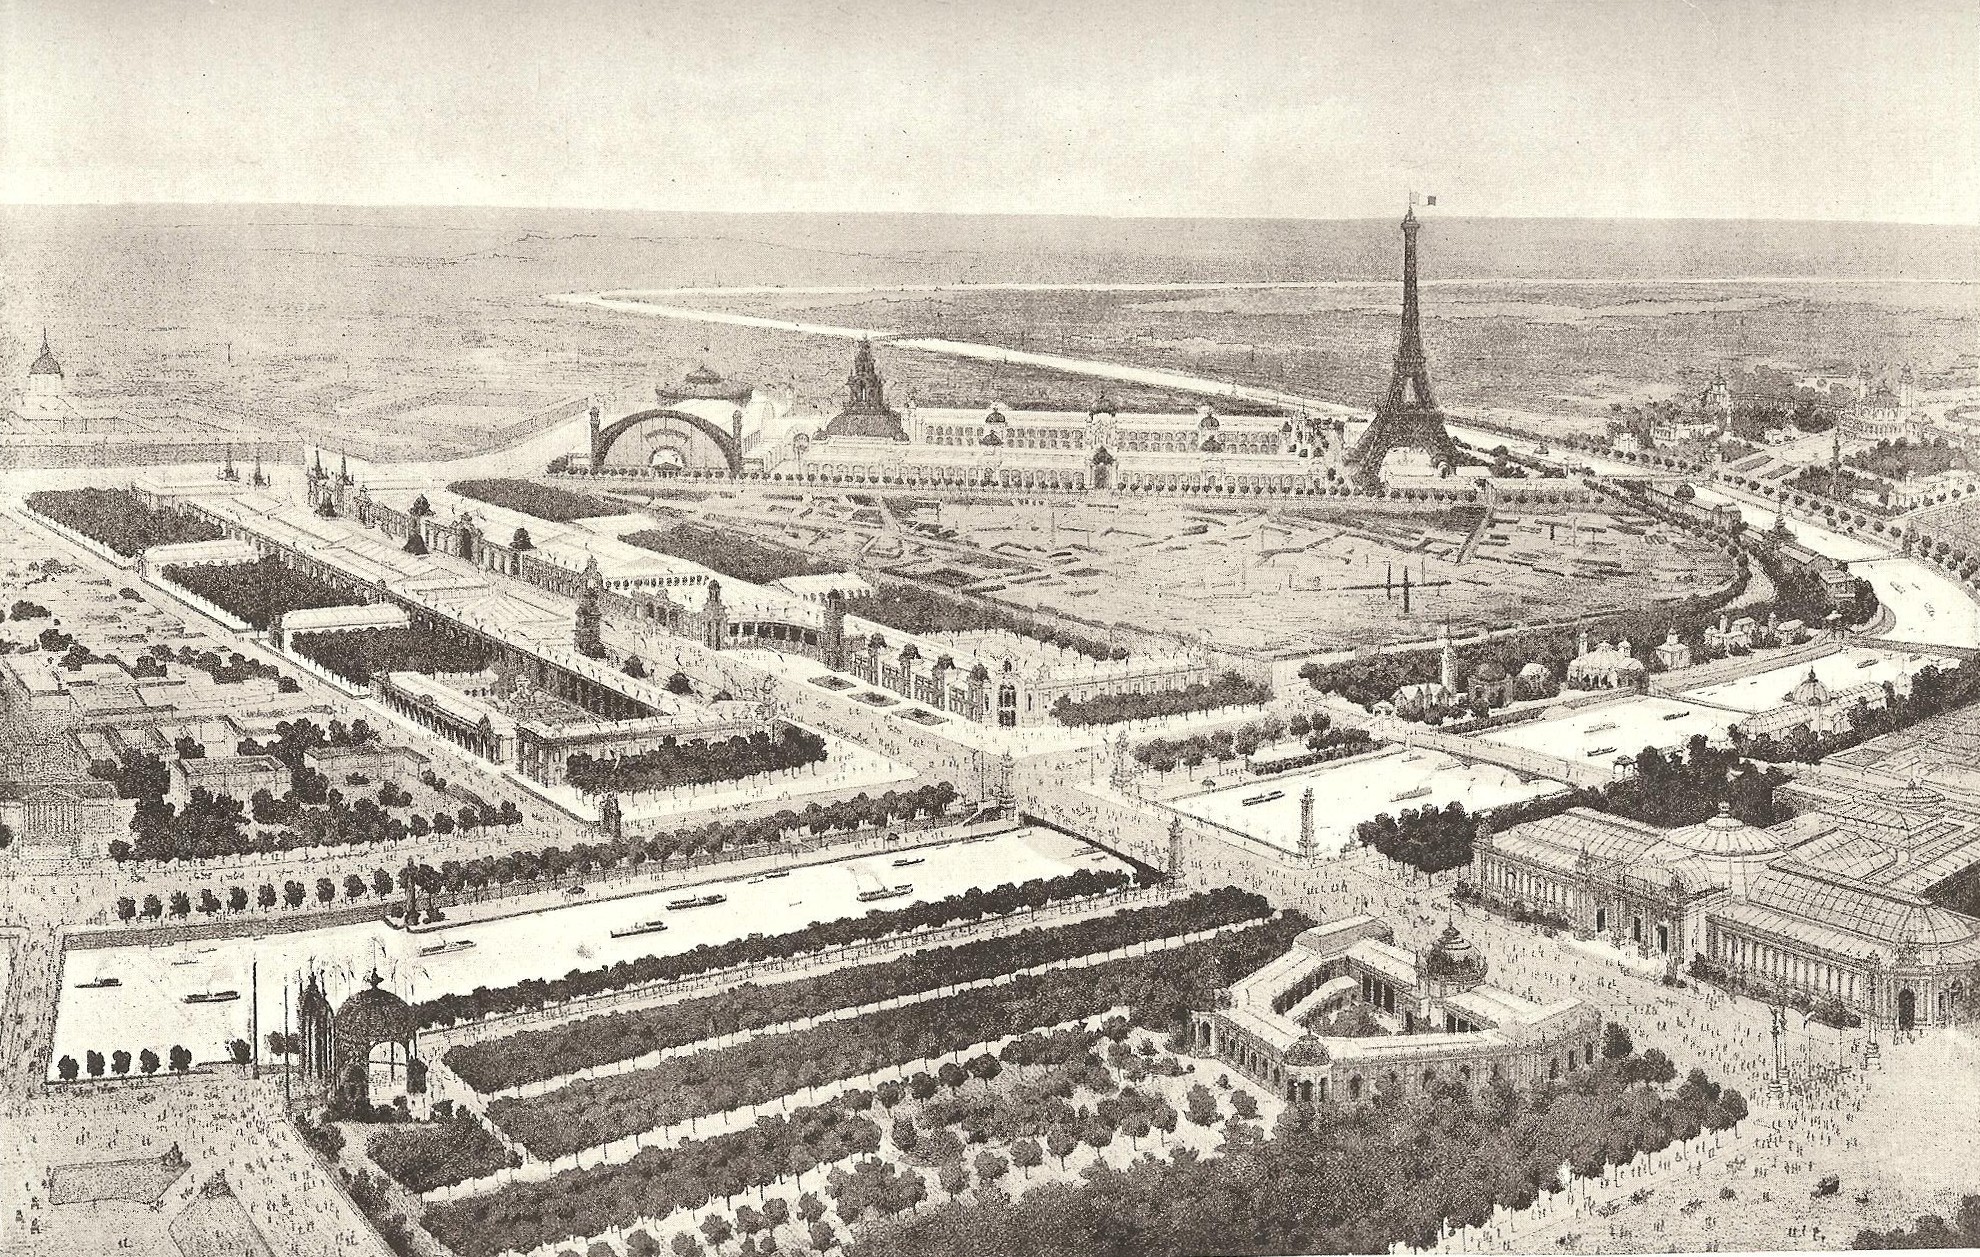 A Perspective View of the 1900 Exposition.